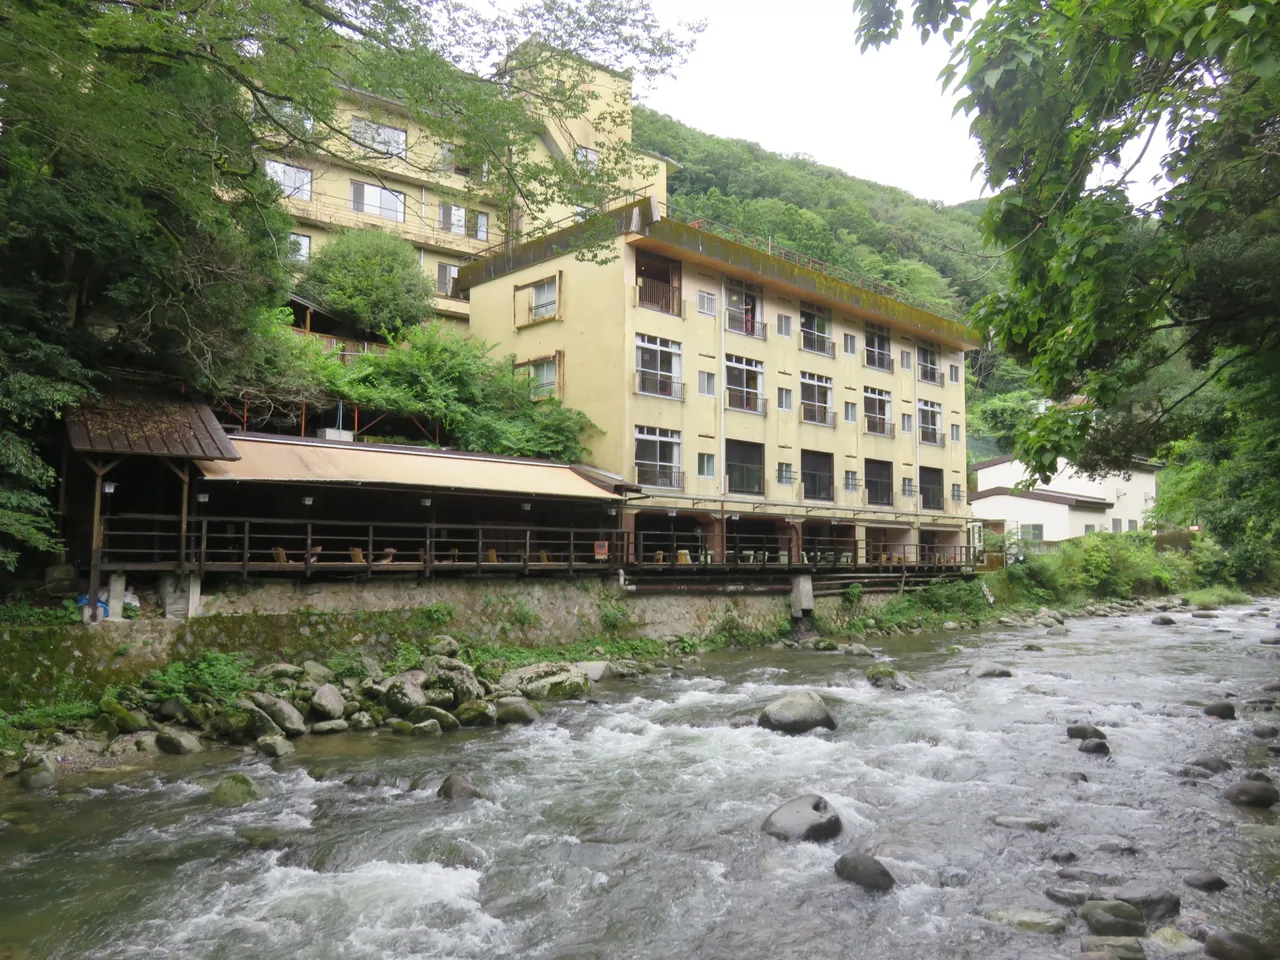 One of the hotels on the river, with a restaurant right next to the river and private hot springs in the better rooms.